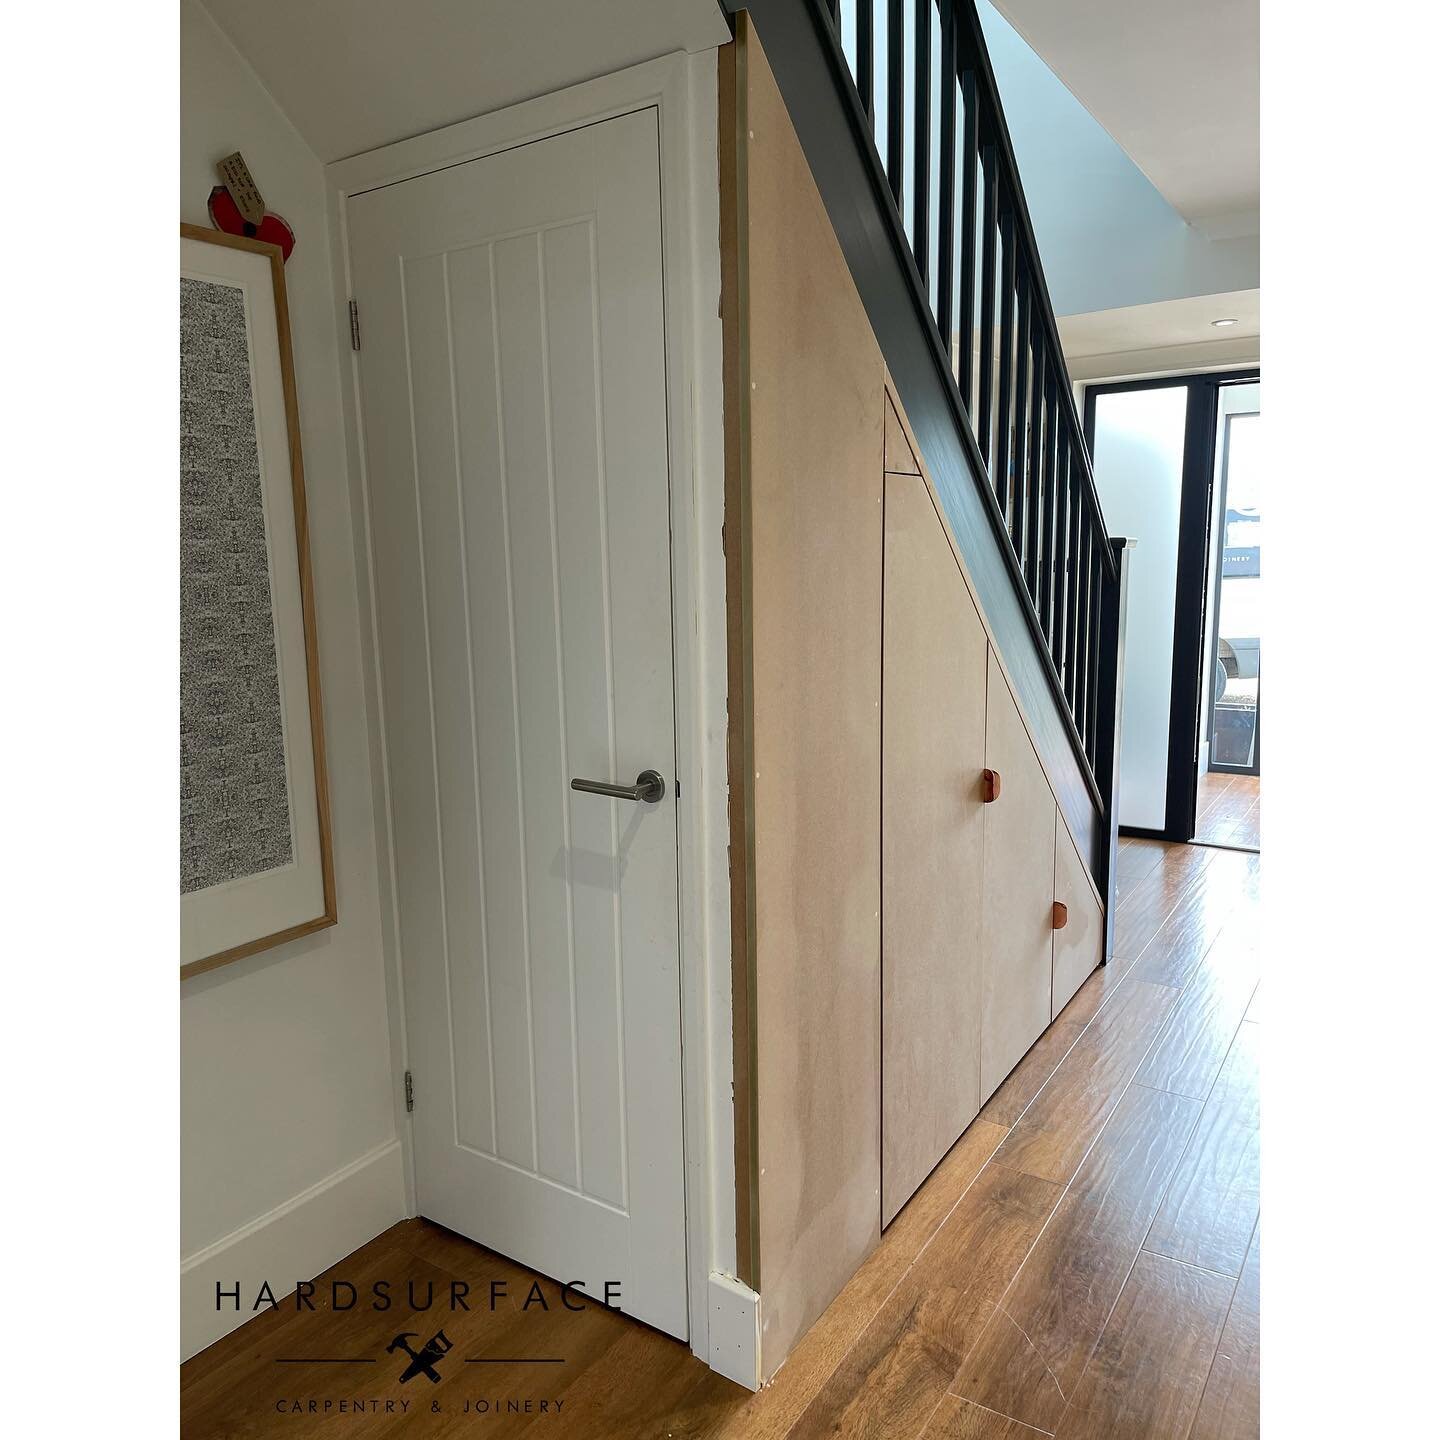 Understairs storage
Fed up of cluttered cupboards? 
Let us create a storage solution bespokely designed for your needs 
📞 07517 842451 
📧 michael@hardsurface.co.uk
#hardsurface #carpentry #joinery #understairs